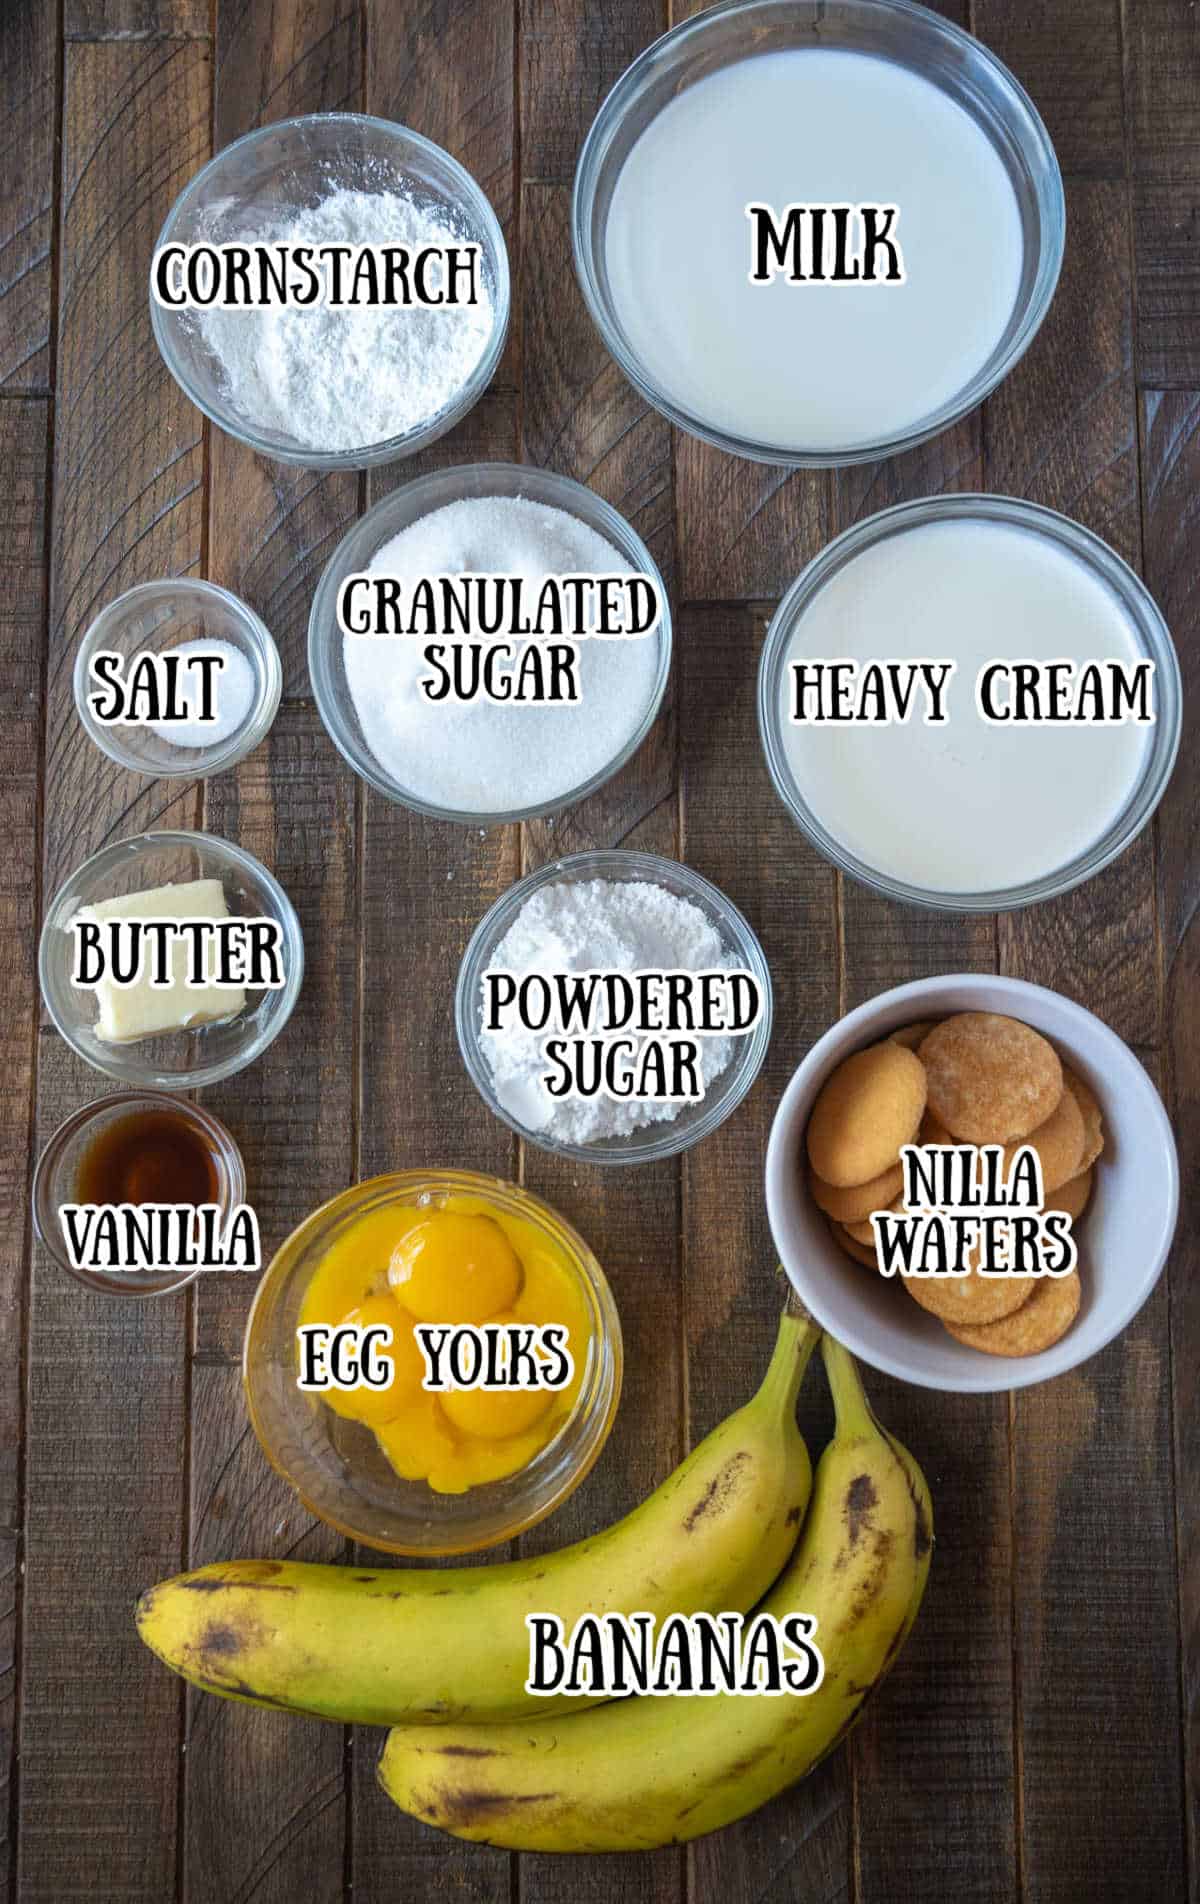 All the ingredients needed for banana pudding.